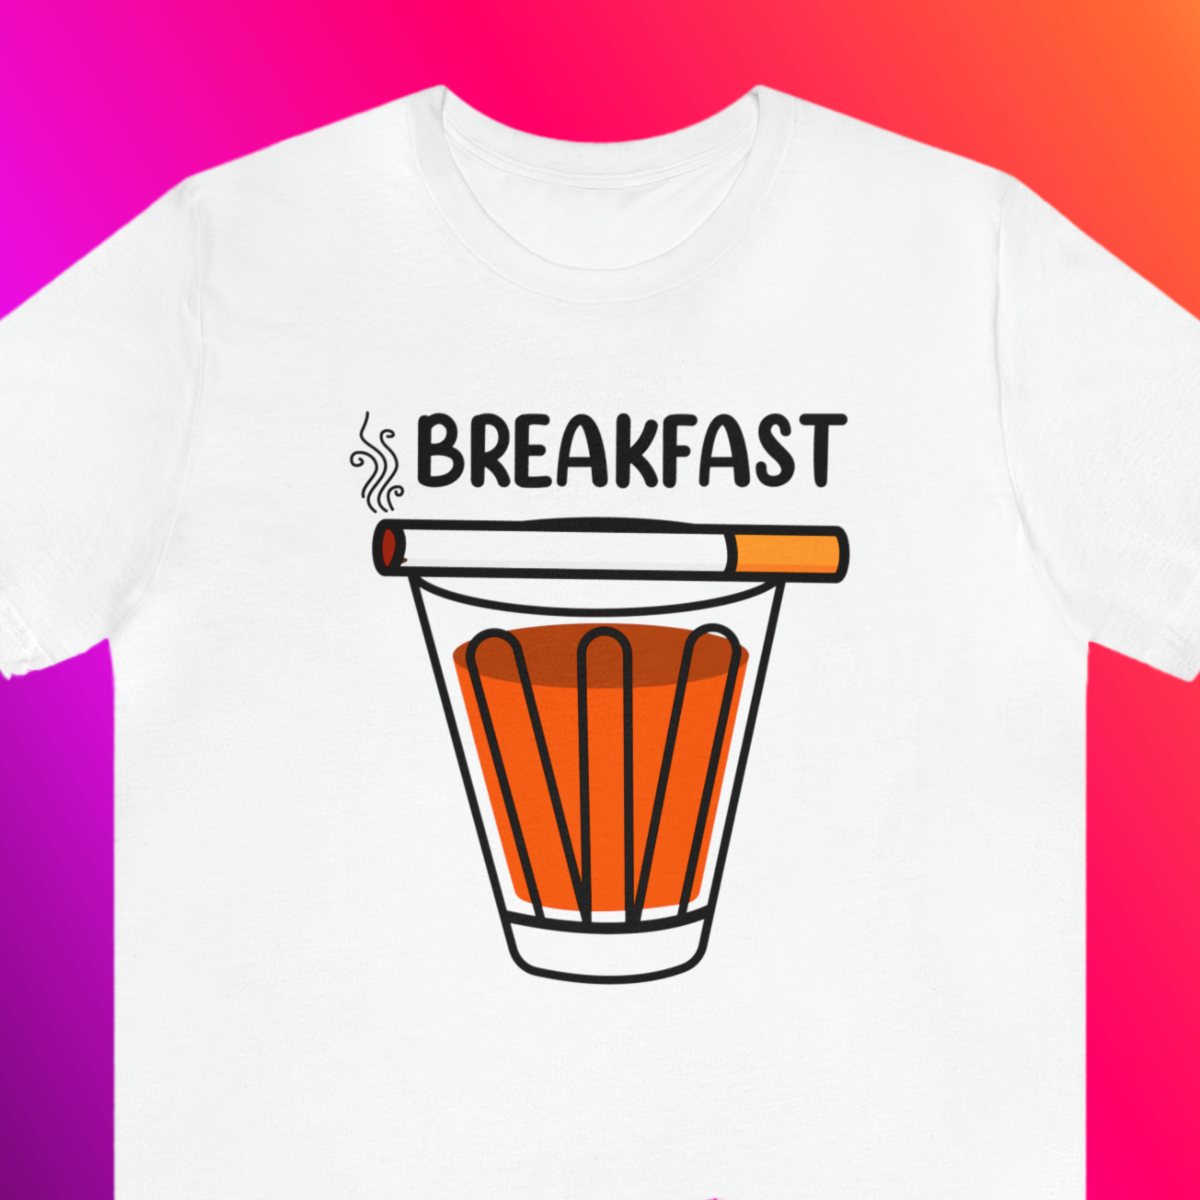 Foodie-inspired Breakfast T-shirt.
Product Name: Breakfast T-Shirt